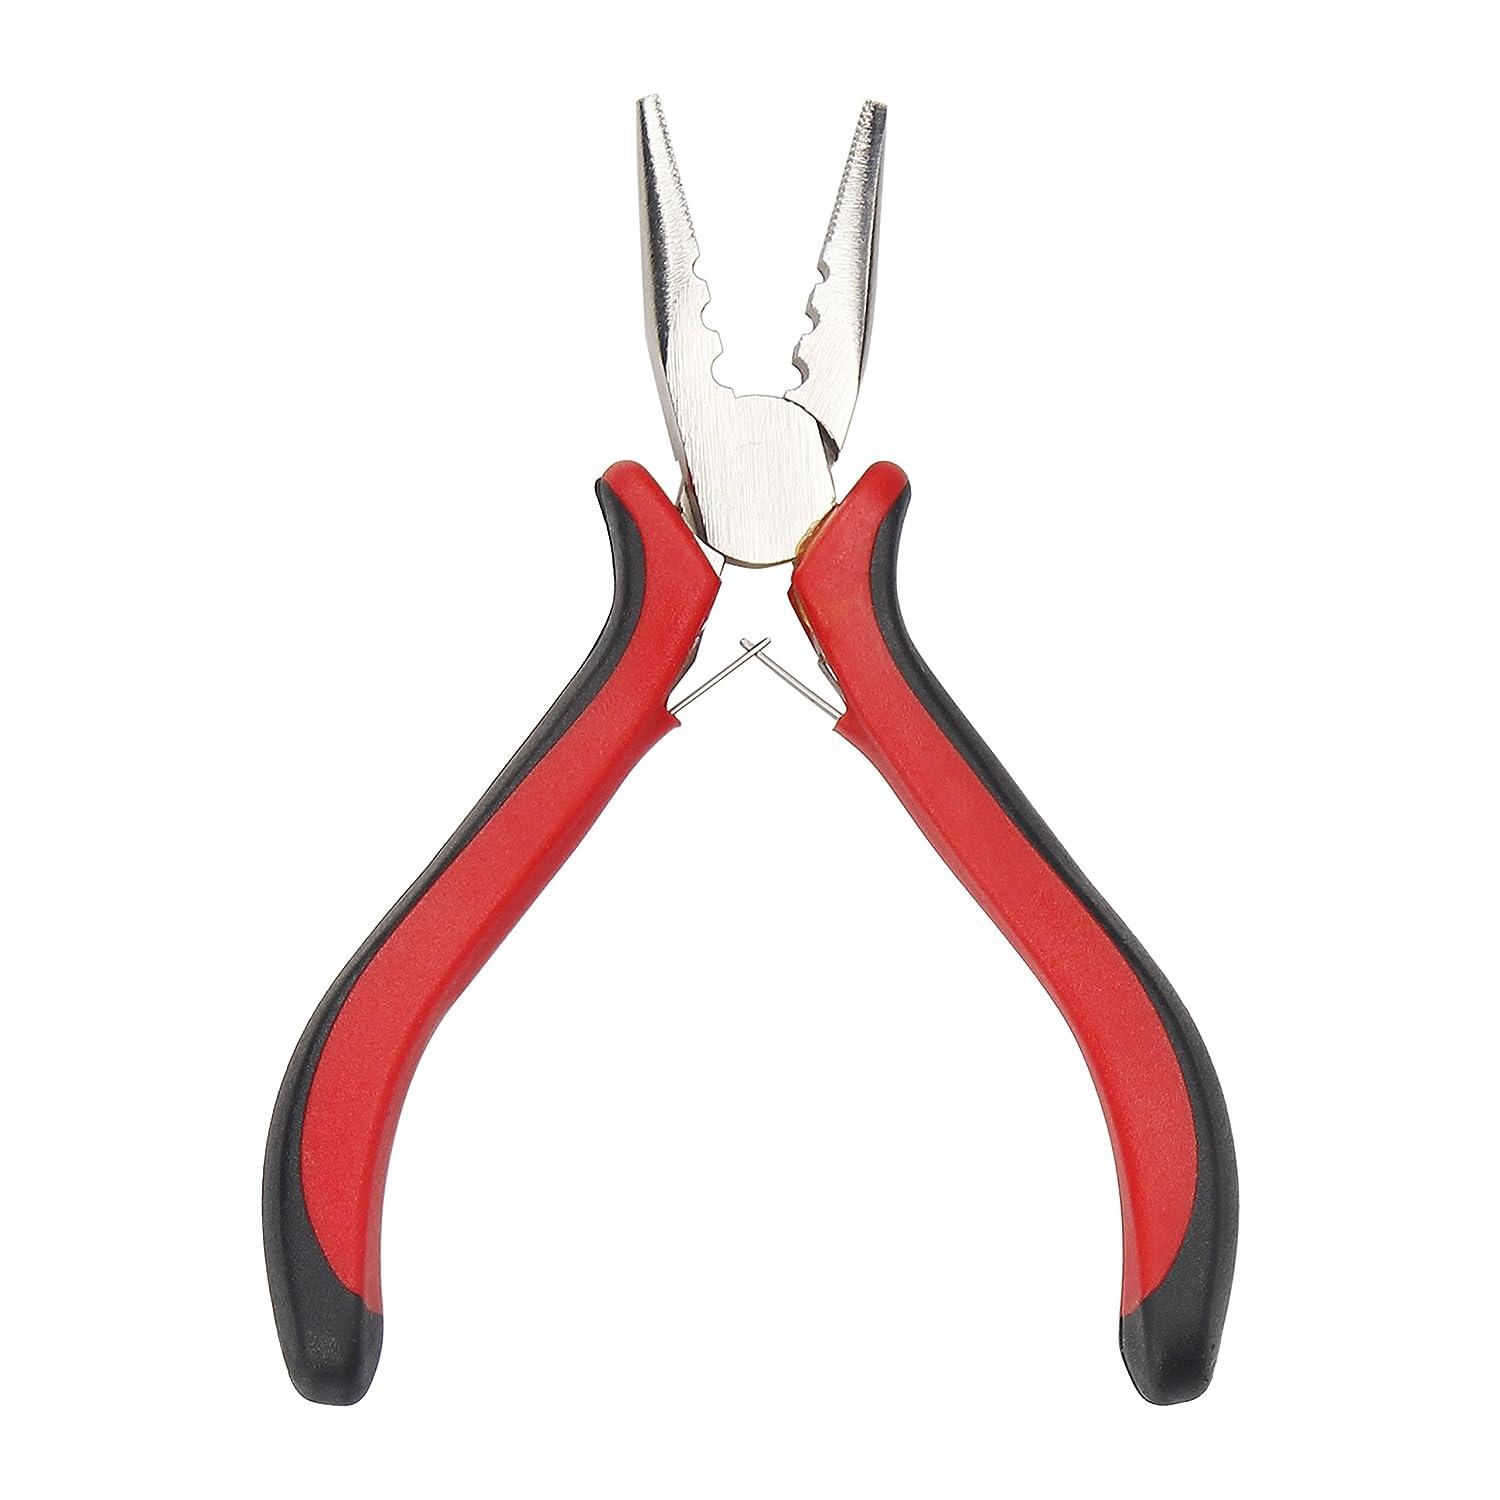 Professional Hair Extensions Pliers, Flat Surface Multi Functional